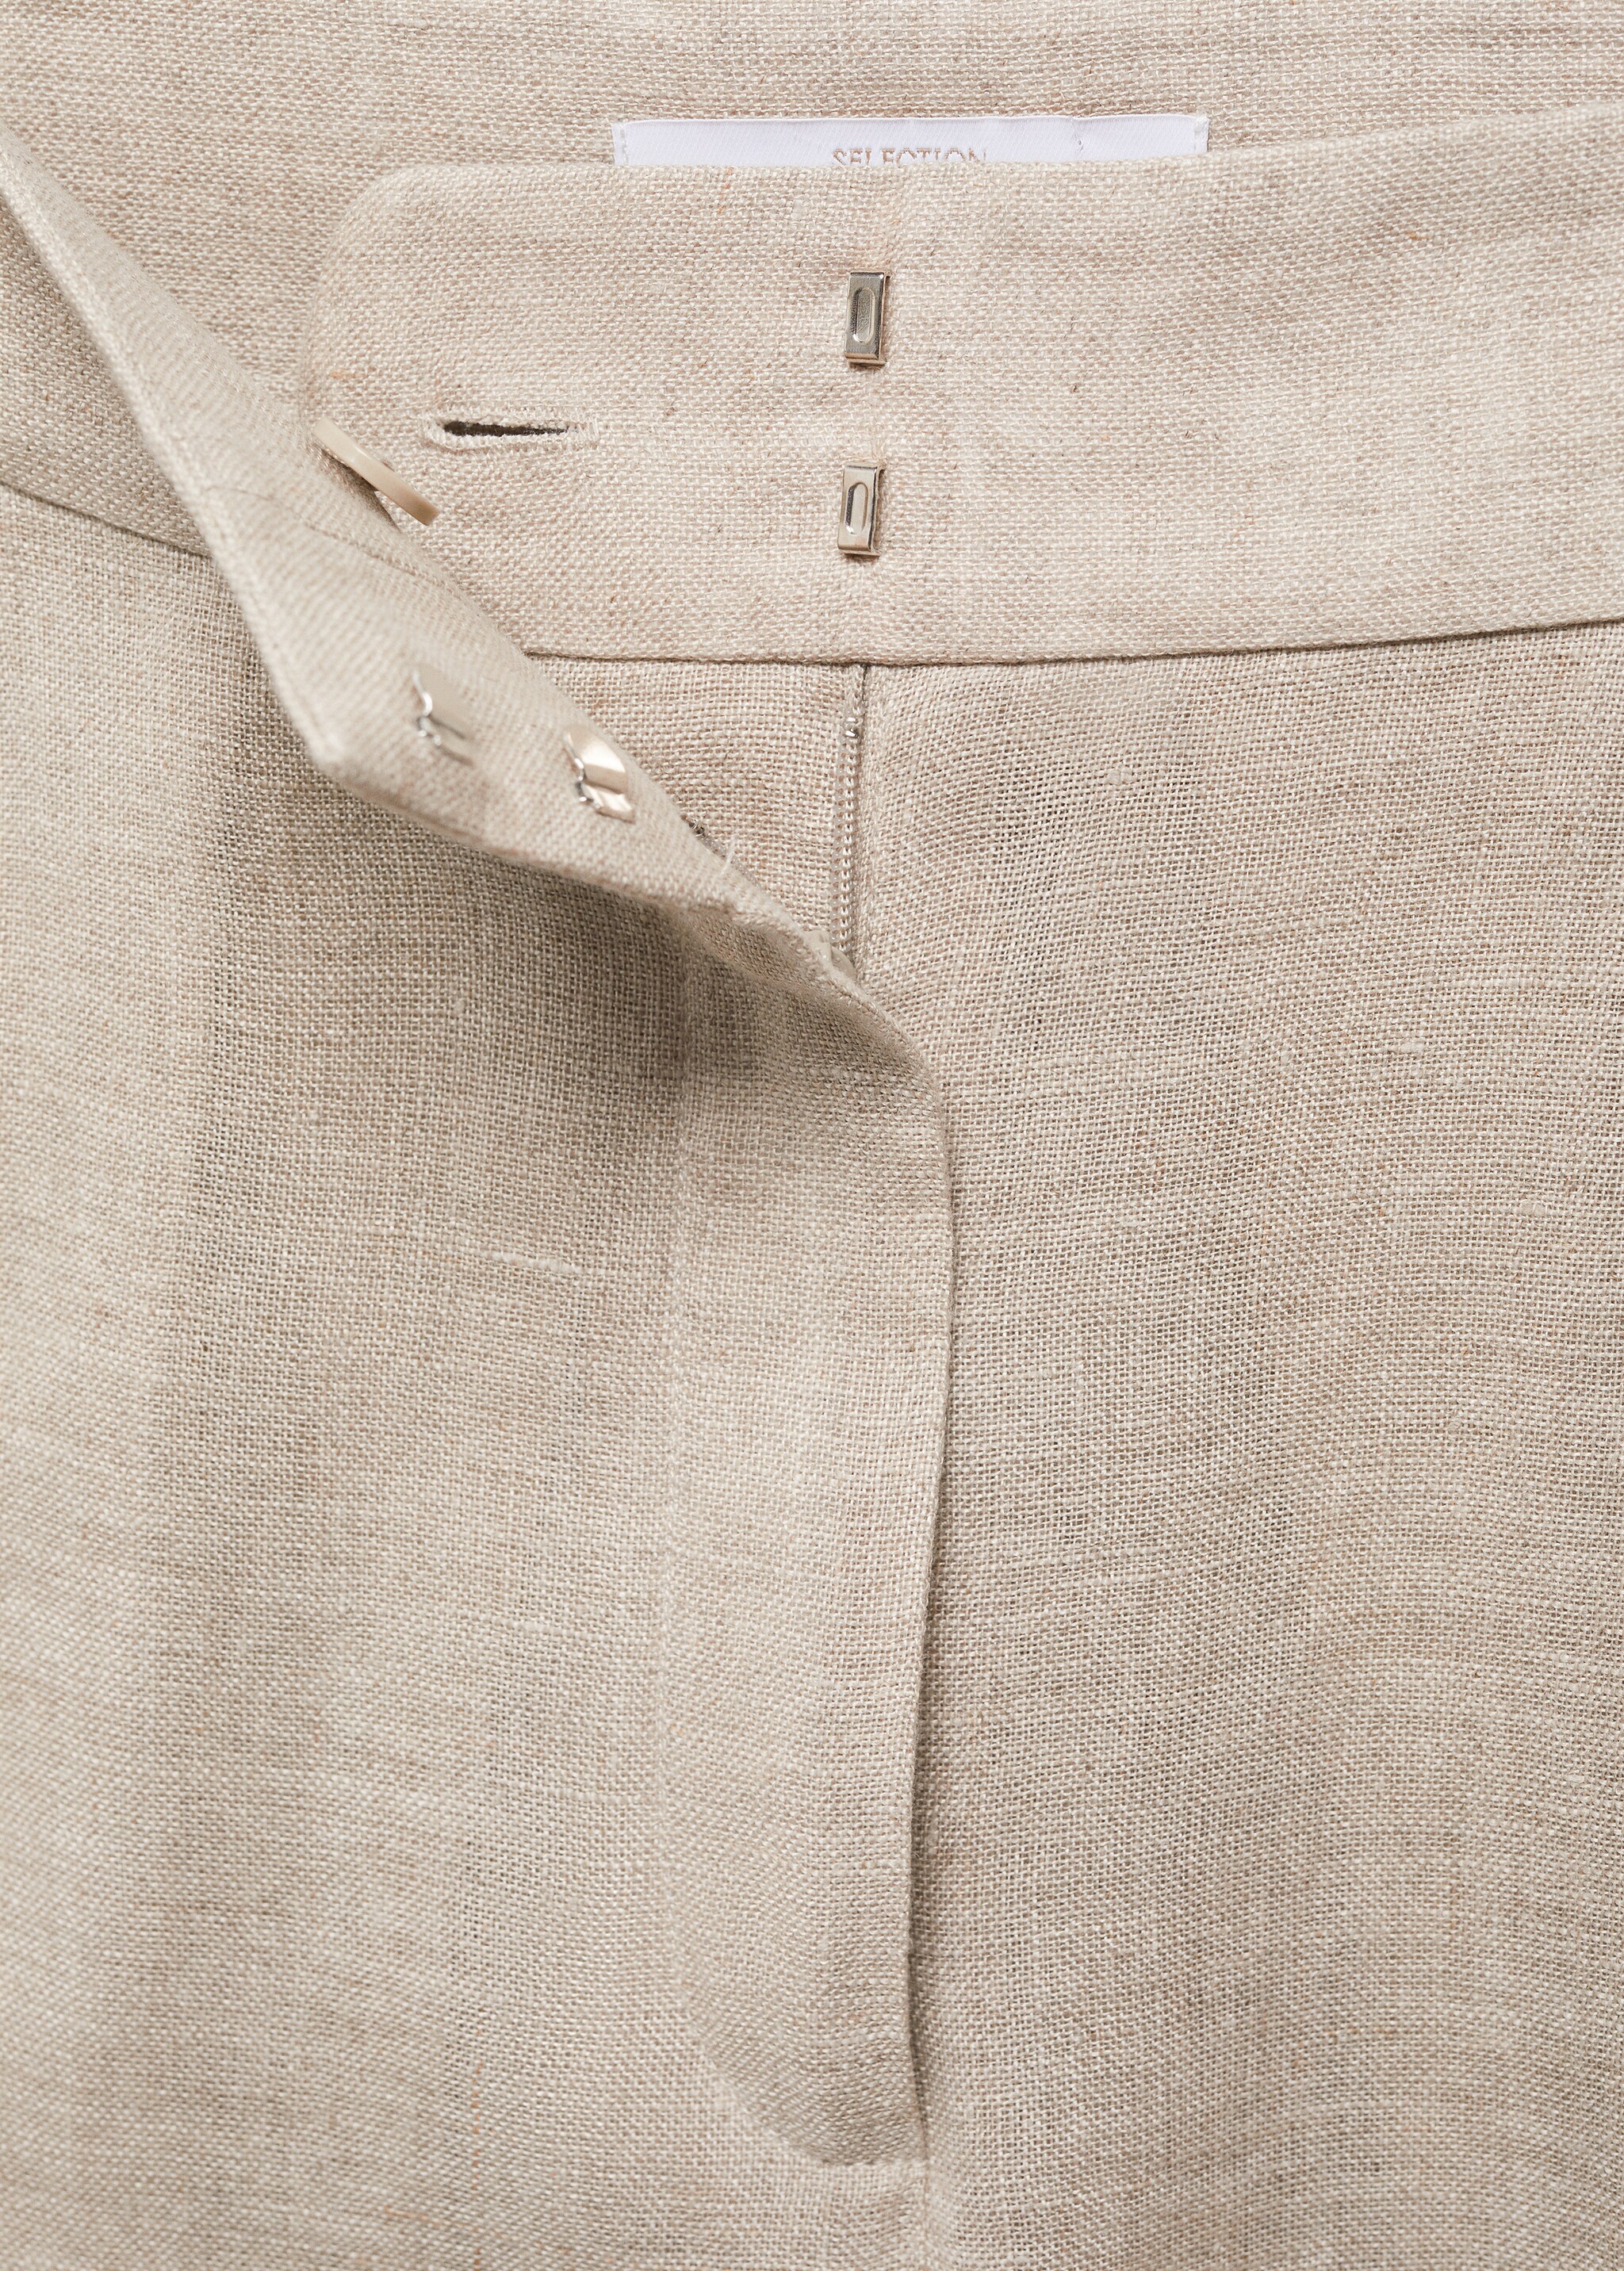 100% linen suit trousers - Details of the article 8